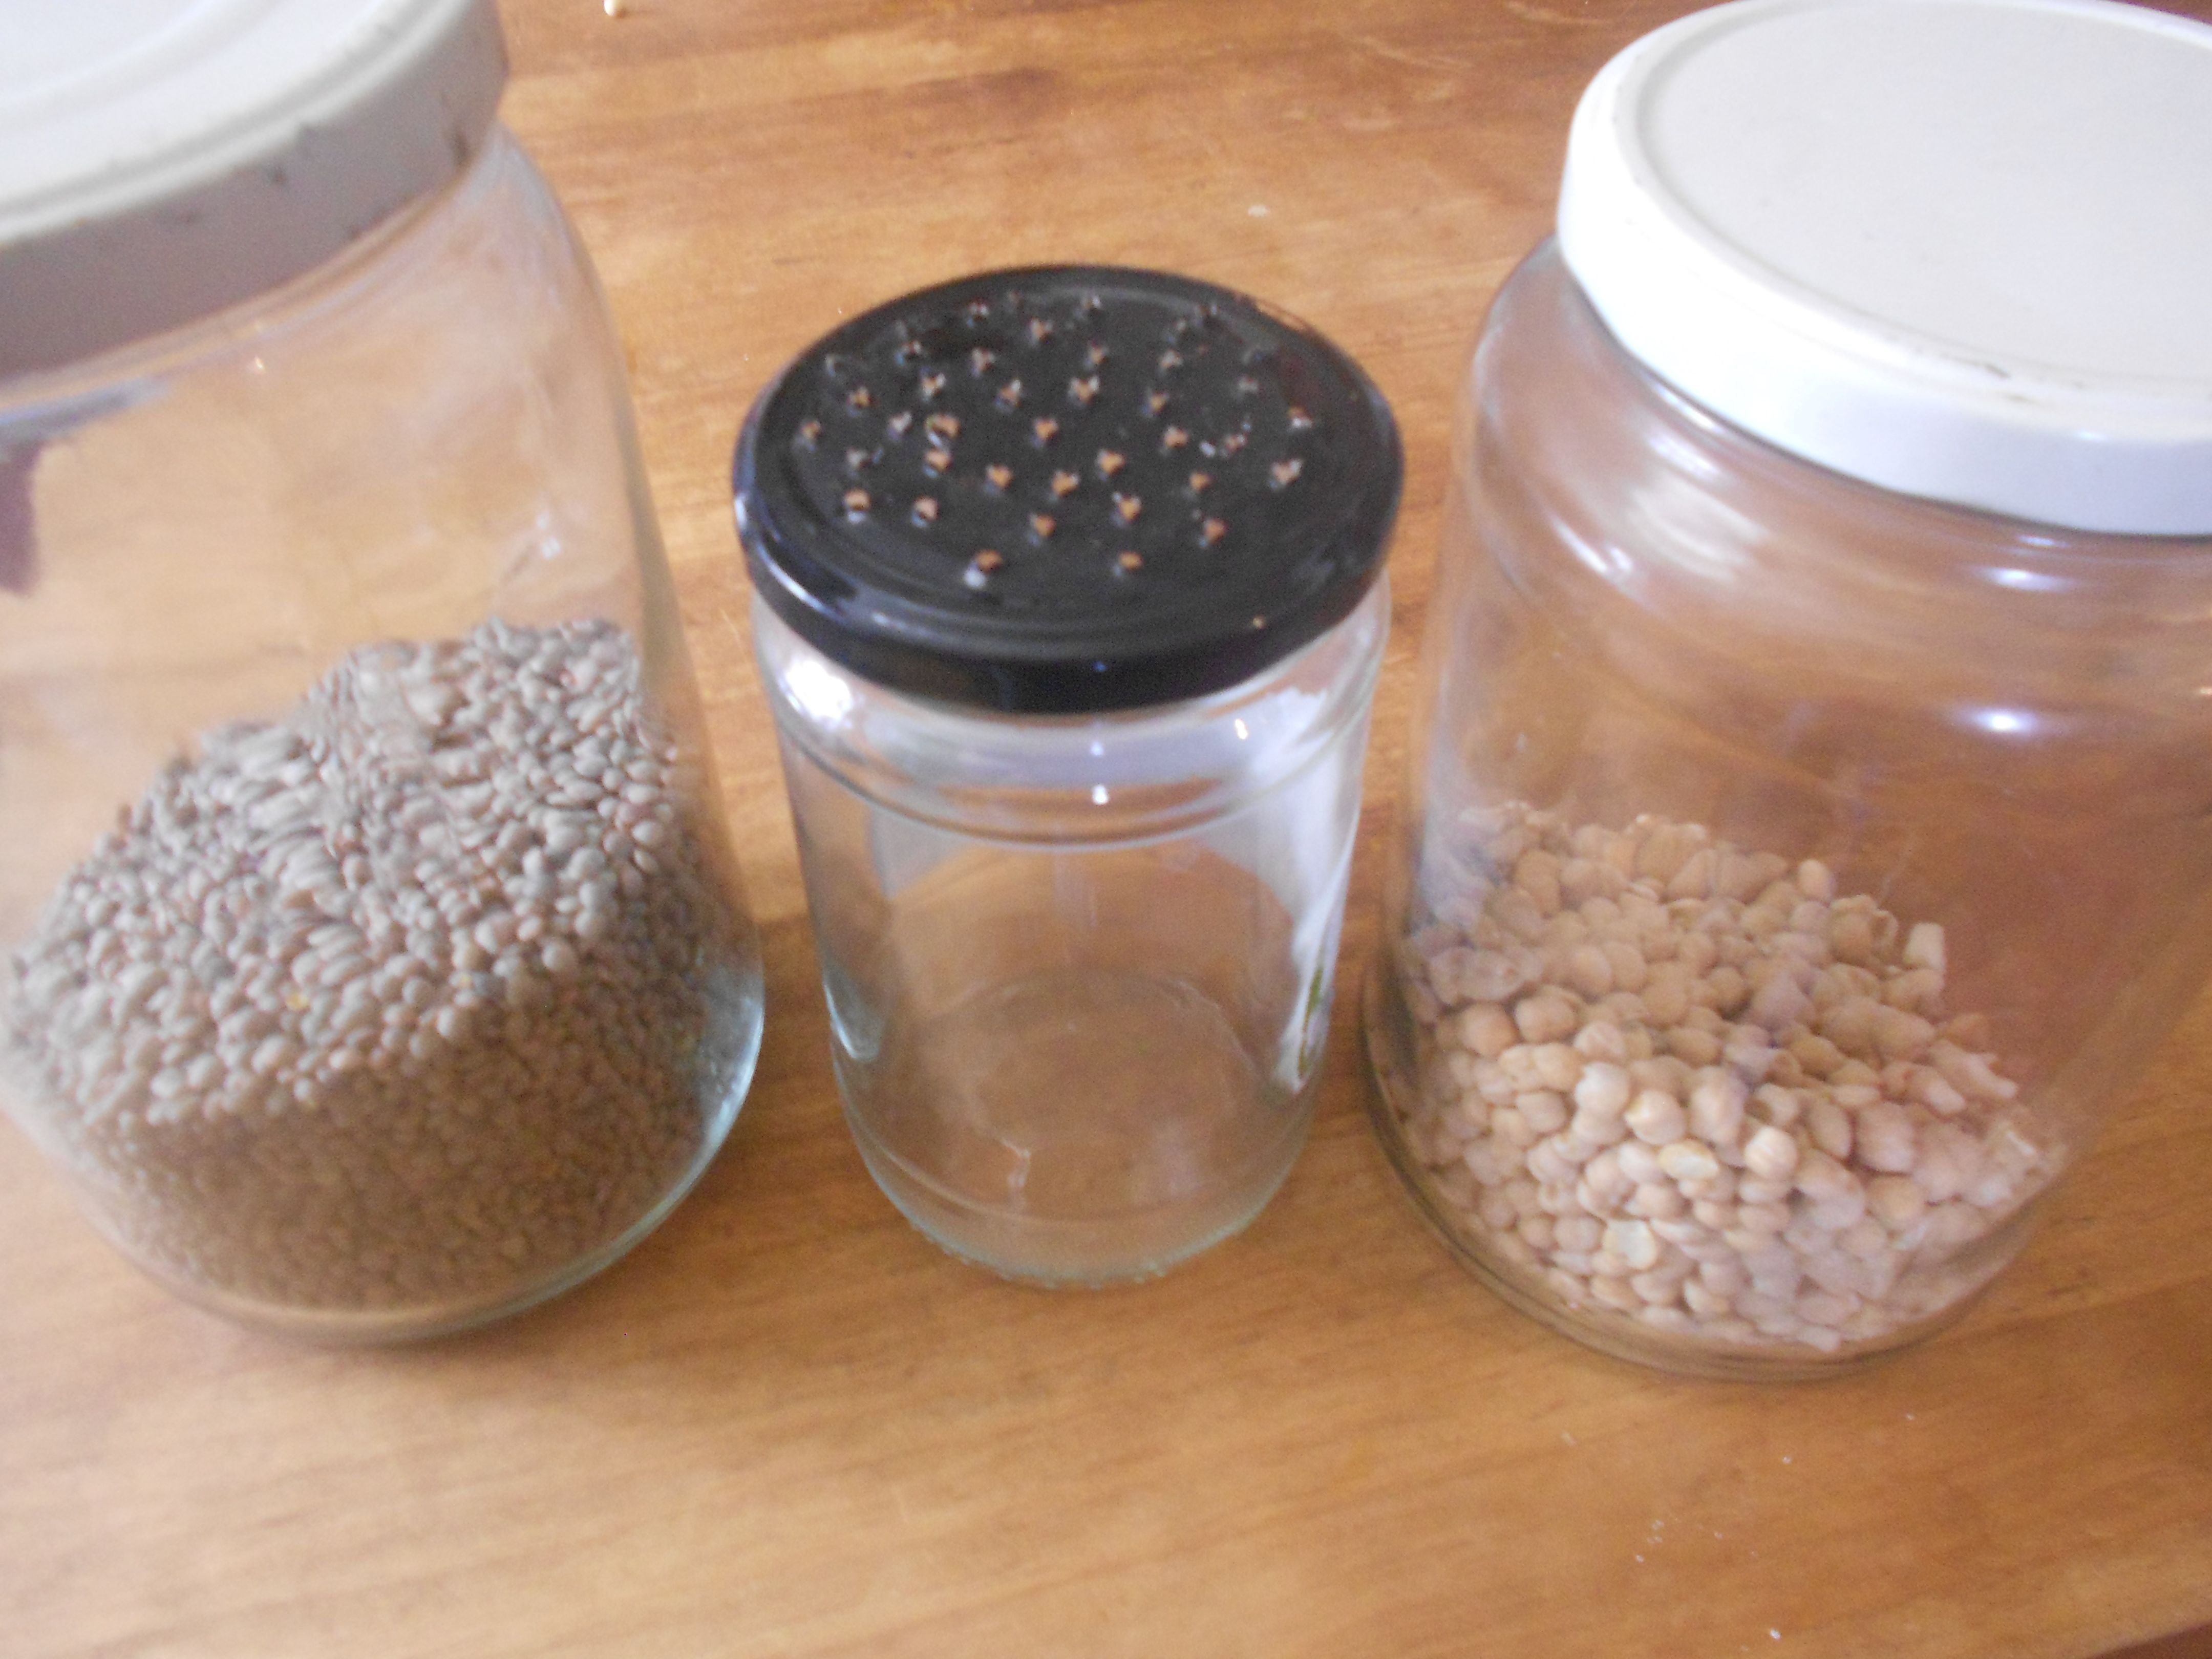 Germination jar and seeds that can be germinated.